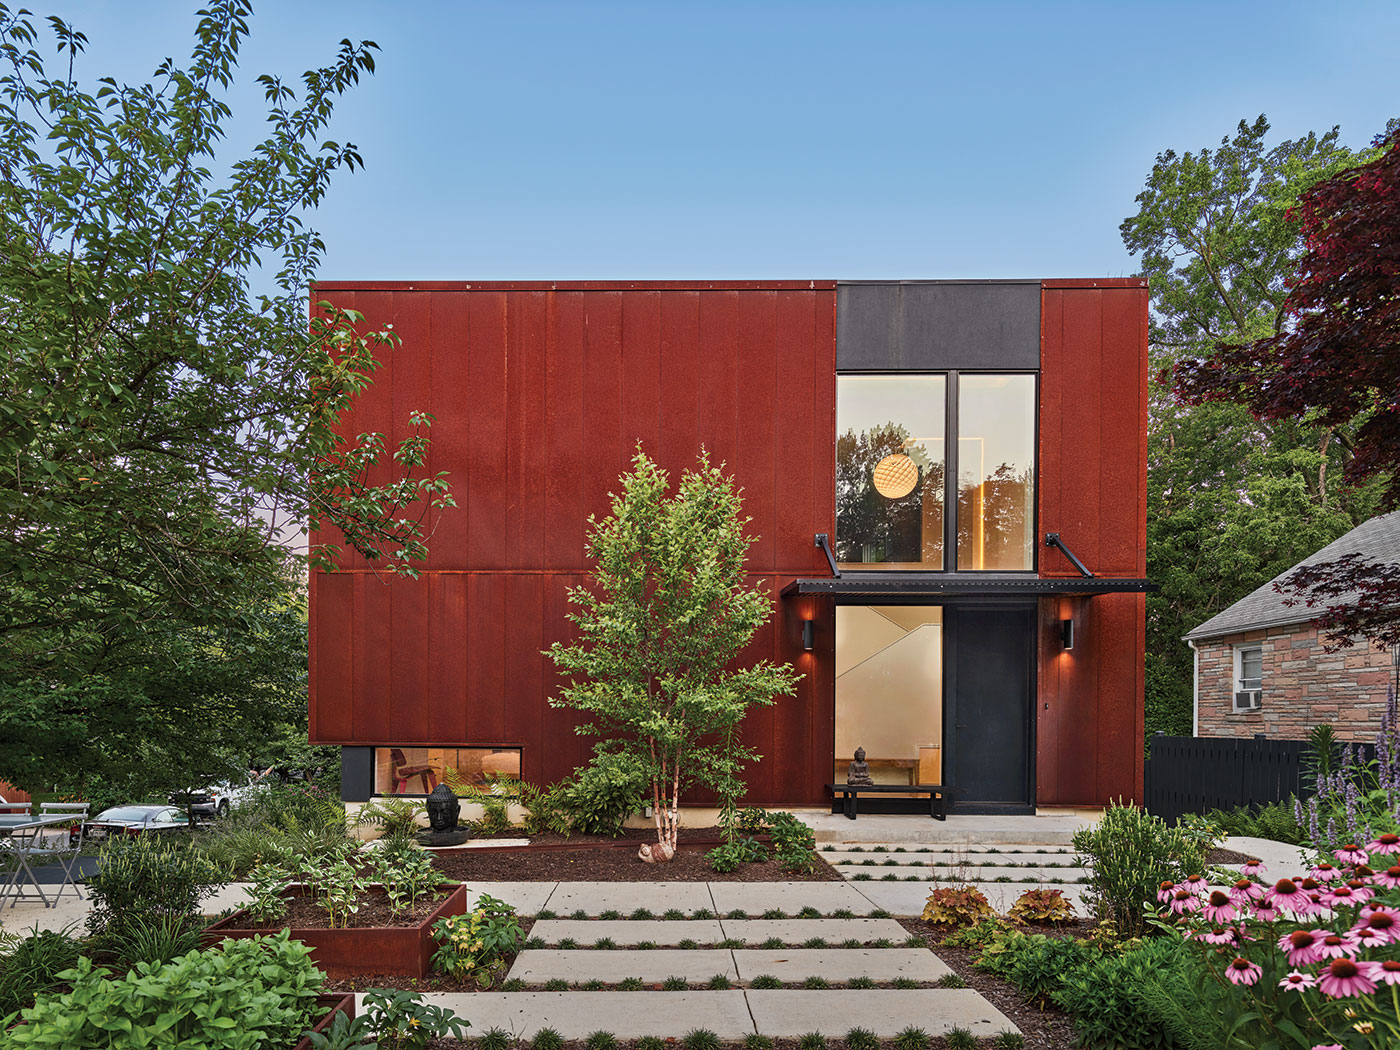 Awarded Arlington Green Choice Platinum Award Green and Modern Design has Corten Rusted Metal Panels mixed with Black Painted Metal Panels and Cantilevered Canopy Designed by HEDS Best Virginia Architects.